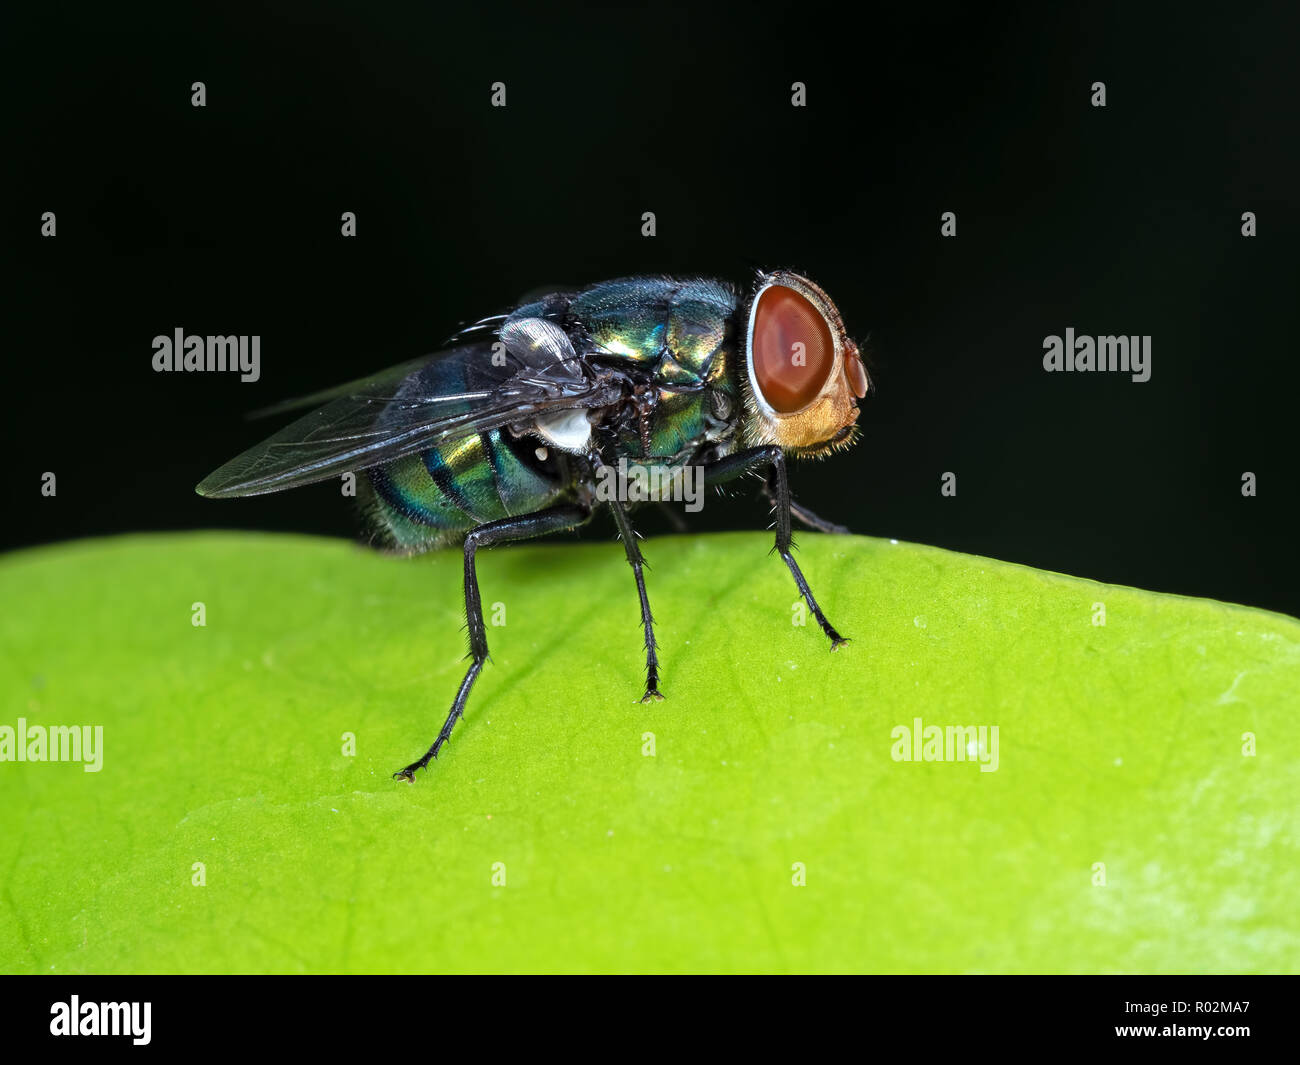 Macro Photography of Blowfly on Green Leaf Isolated on Black Background Stock Photo